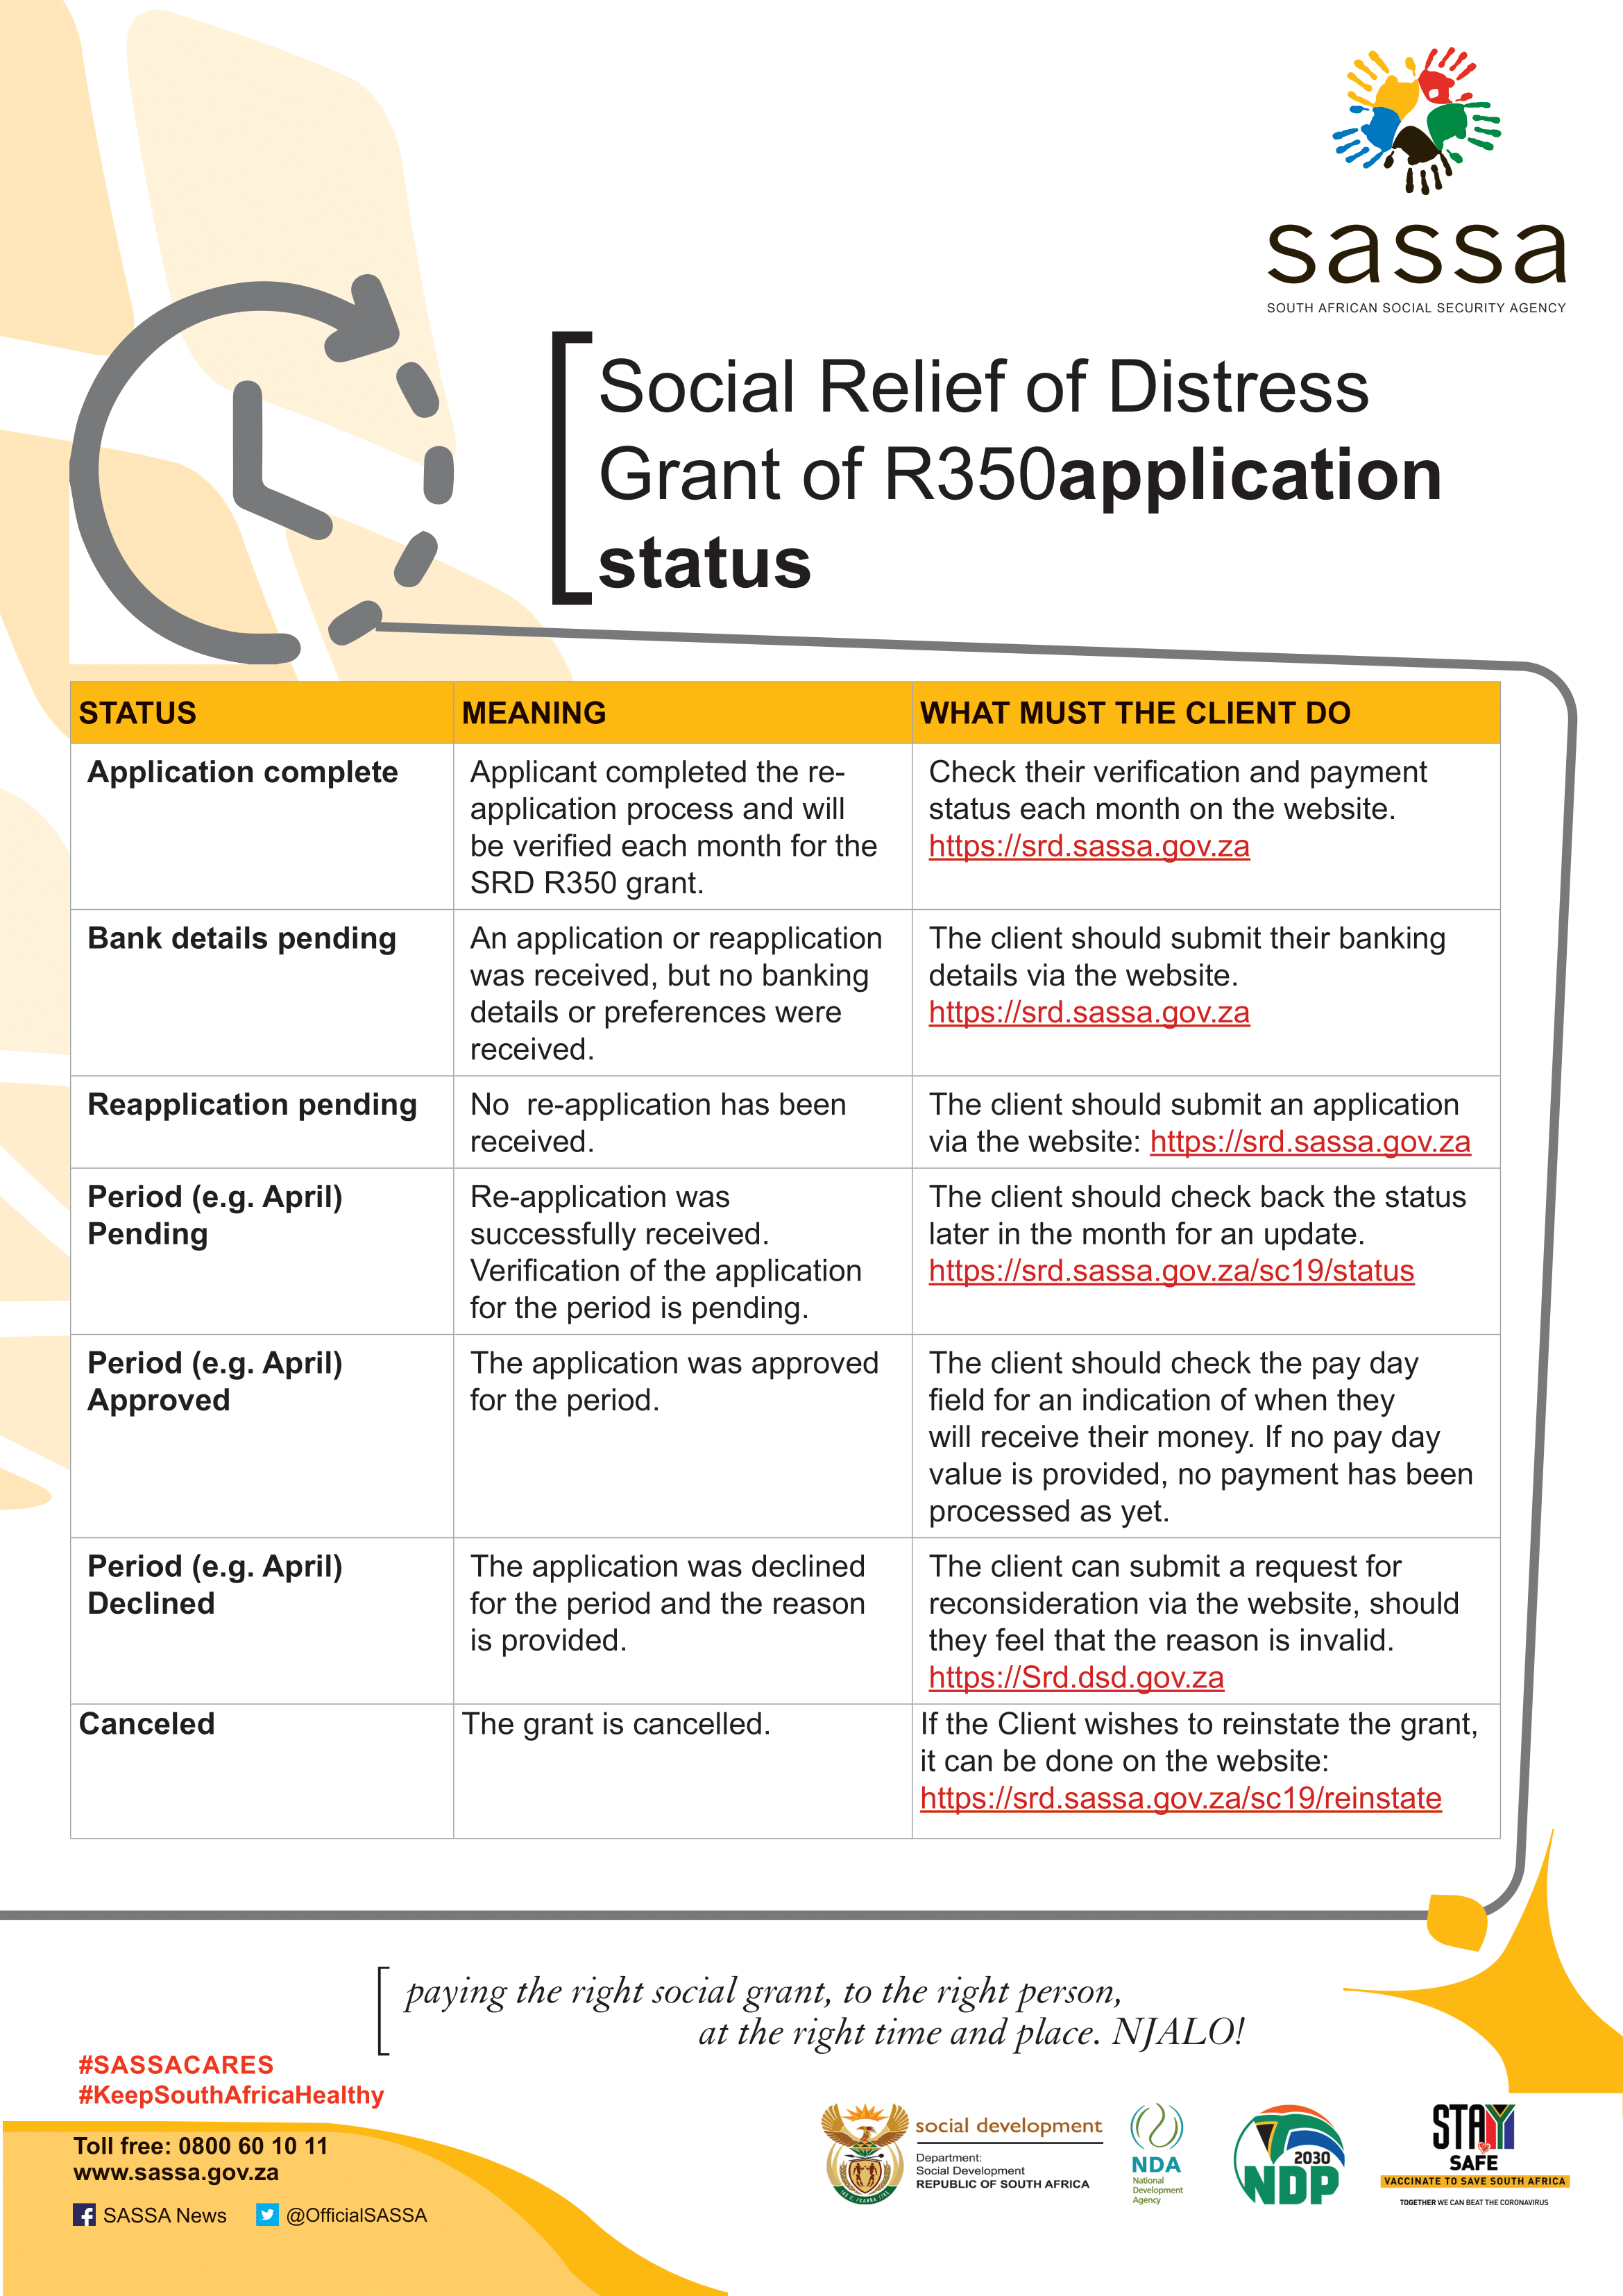  Social Relief of Distress Grant of R350 <strong>application status</strong>